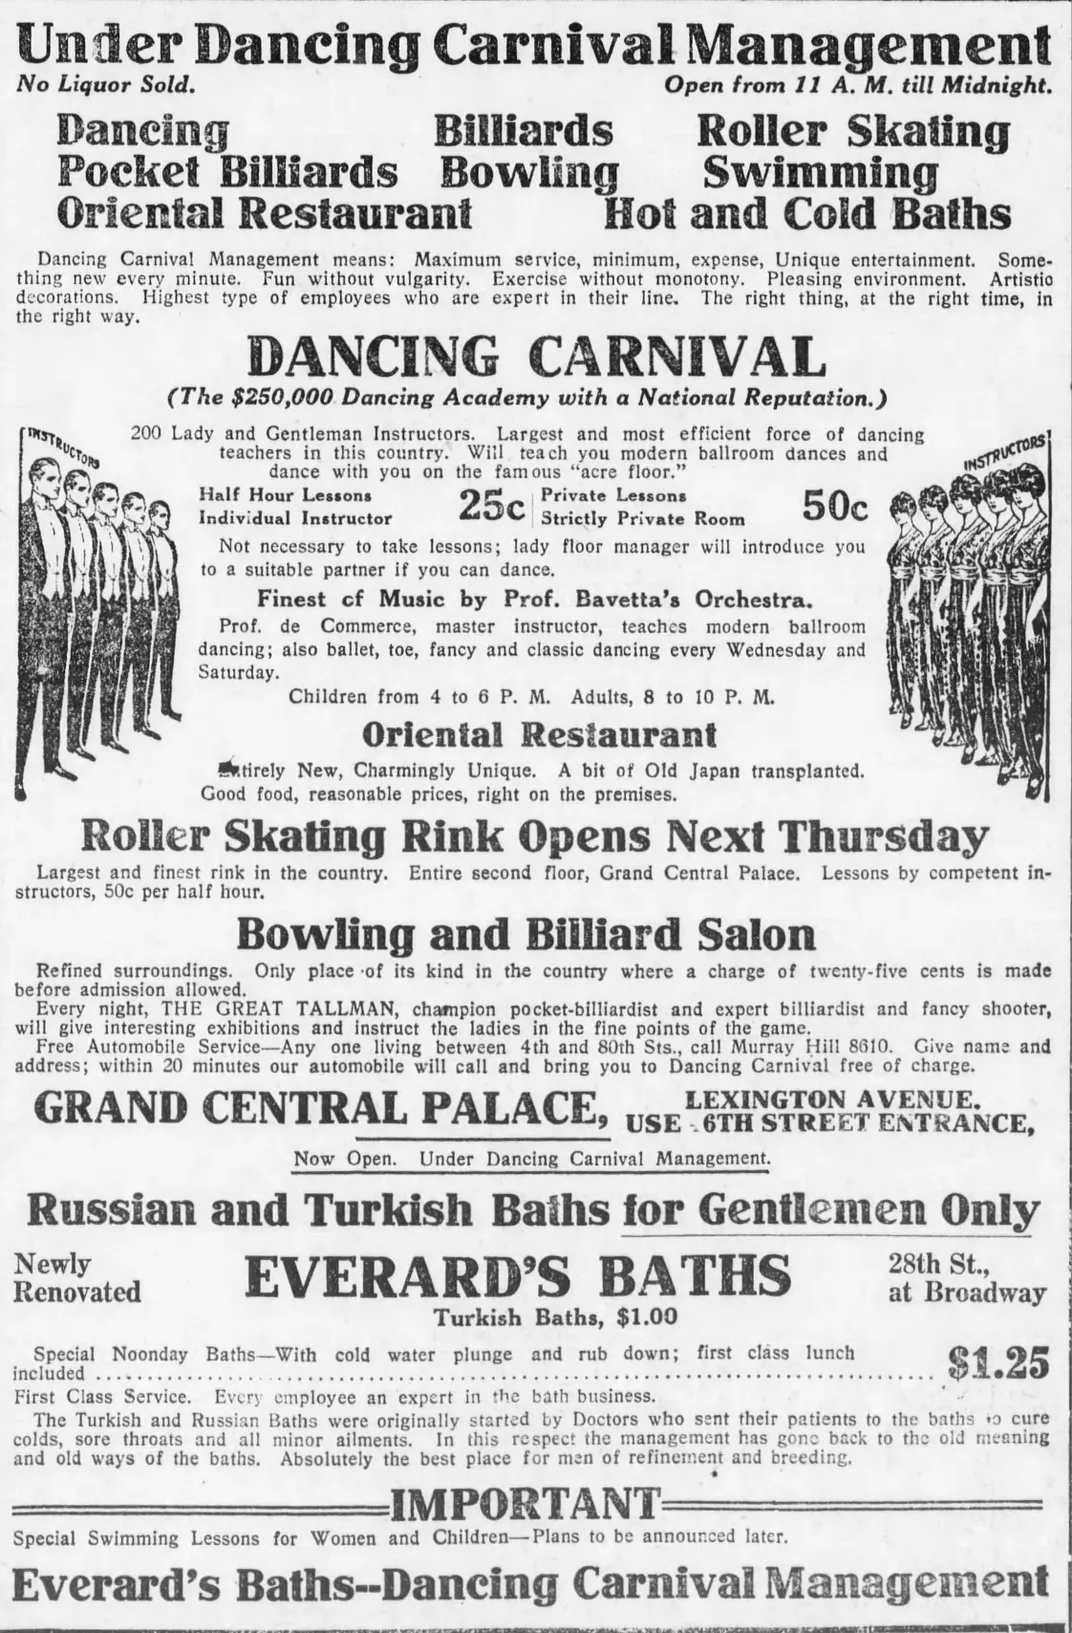 A 1915 newspaper advertisement for the Everard Baths